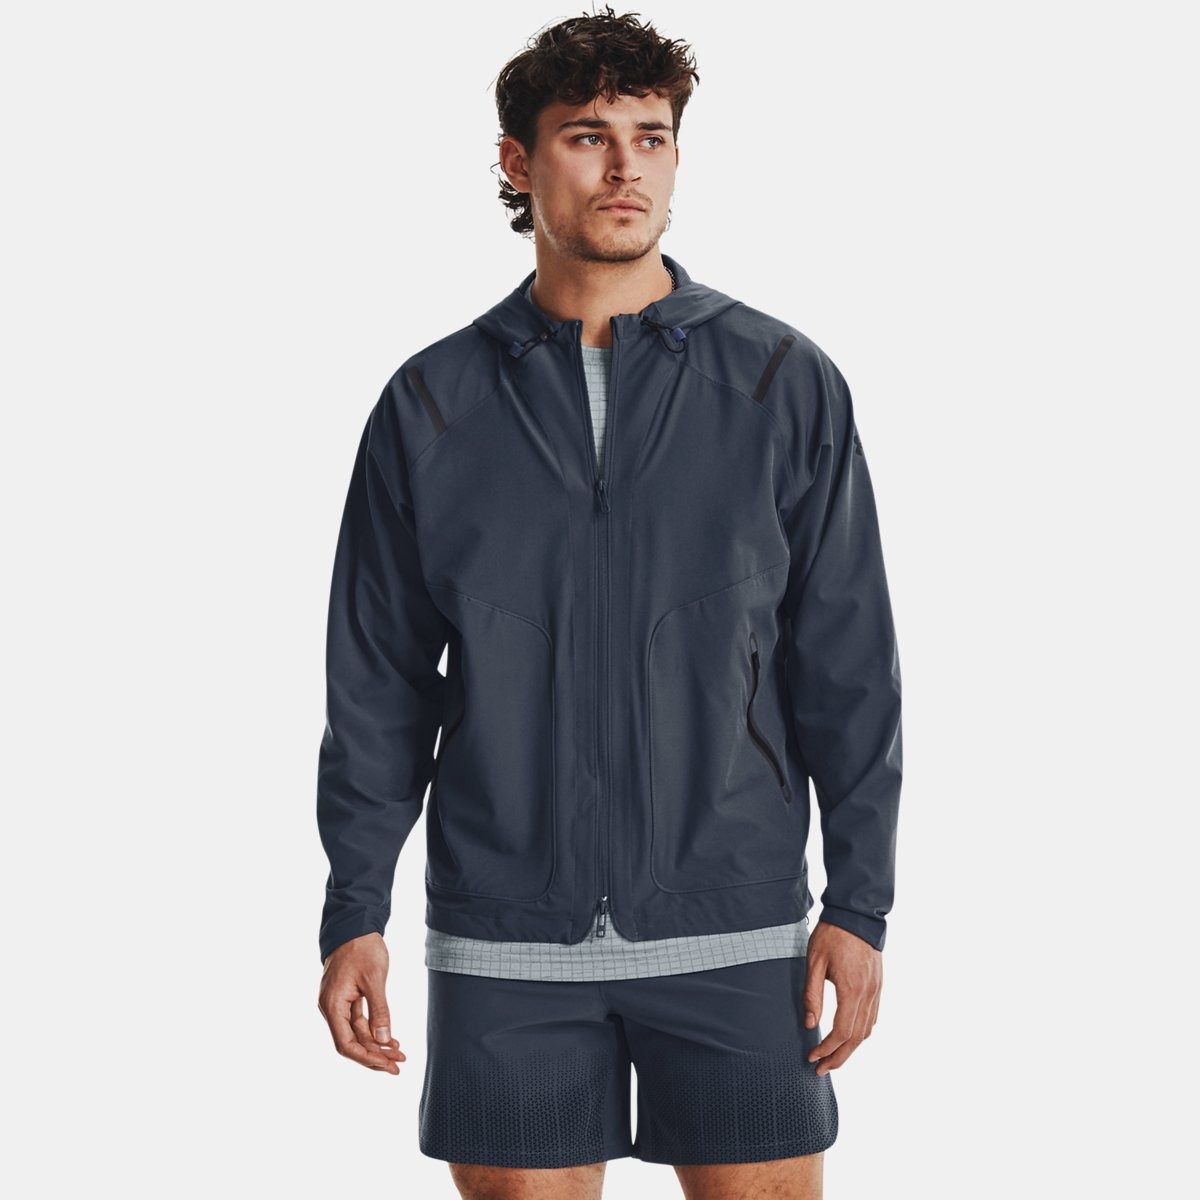 Jacket Grey for Men at Under Armour GOOFASH